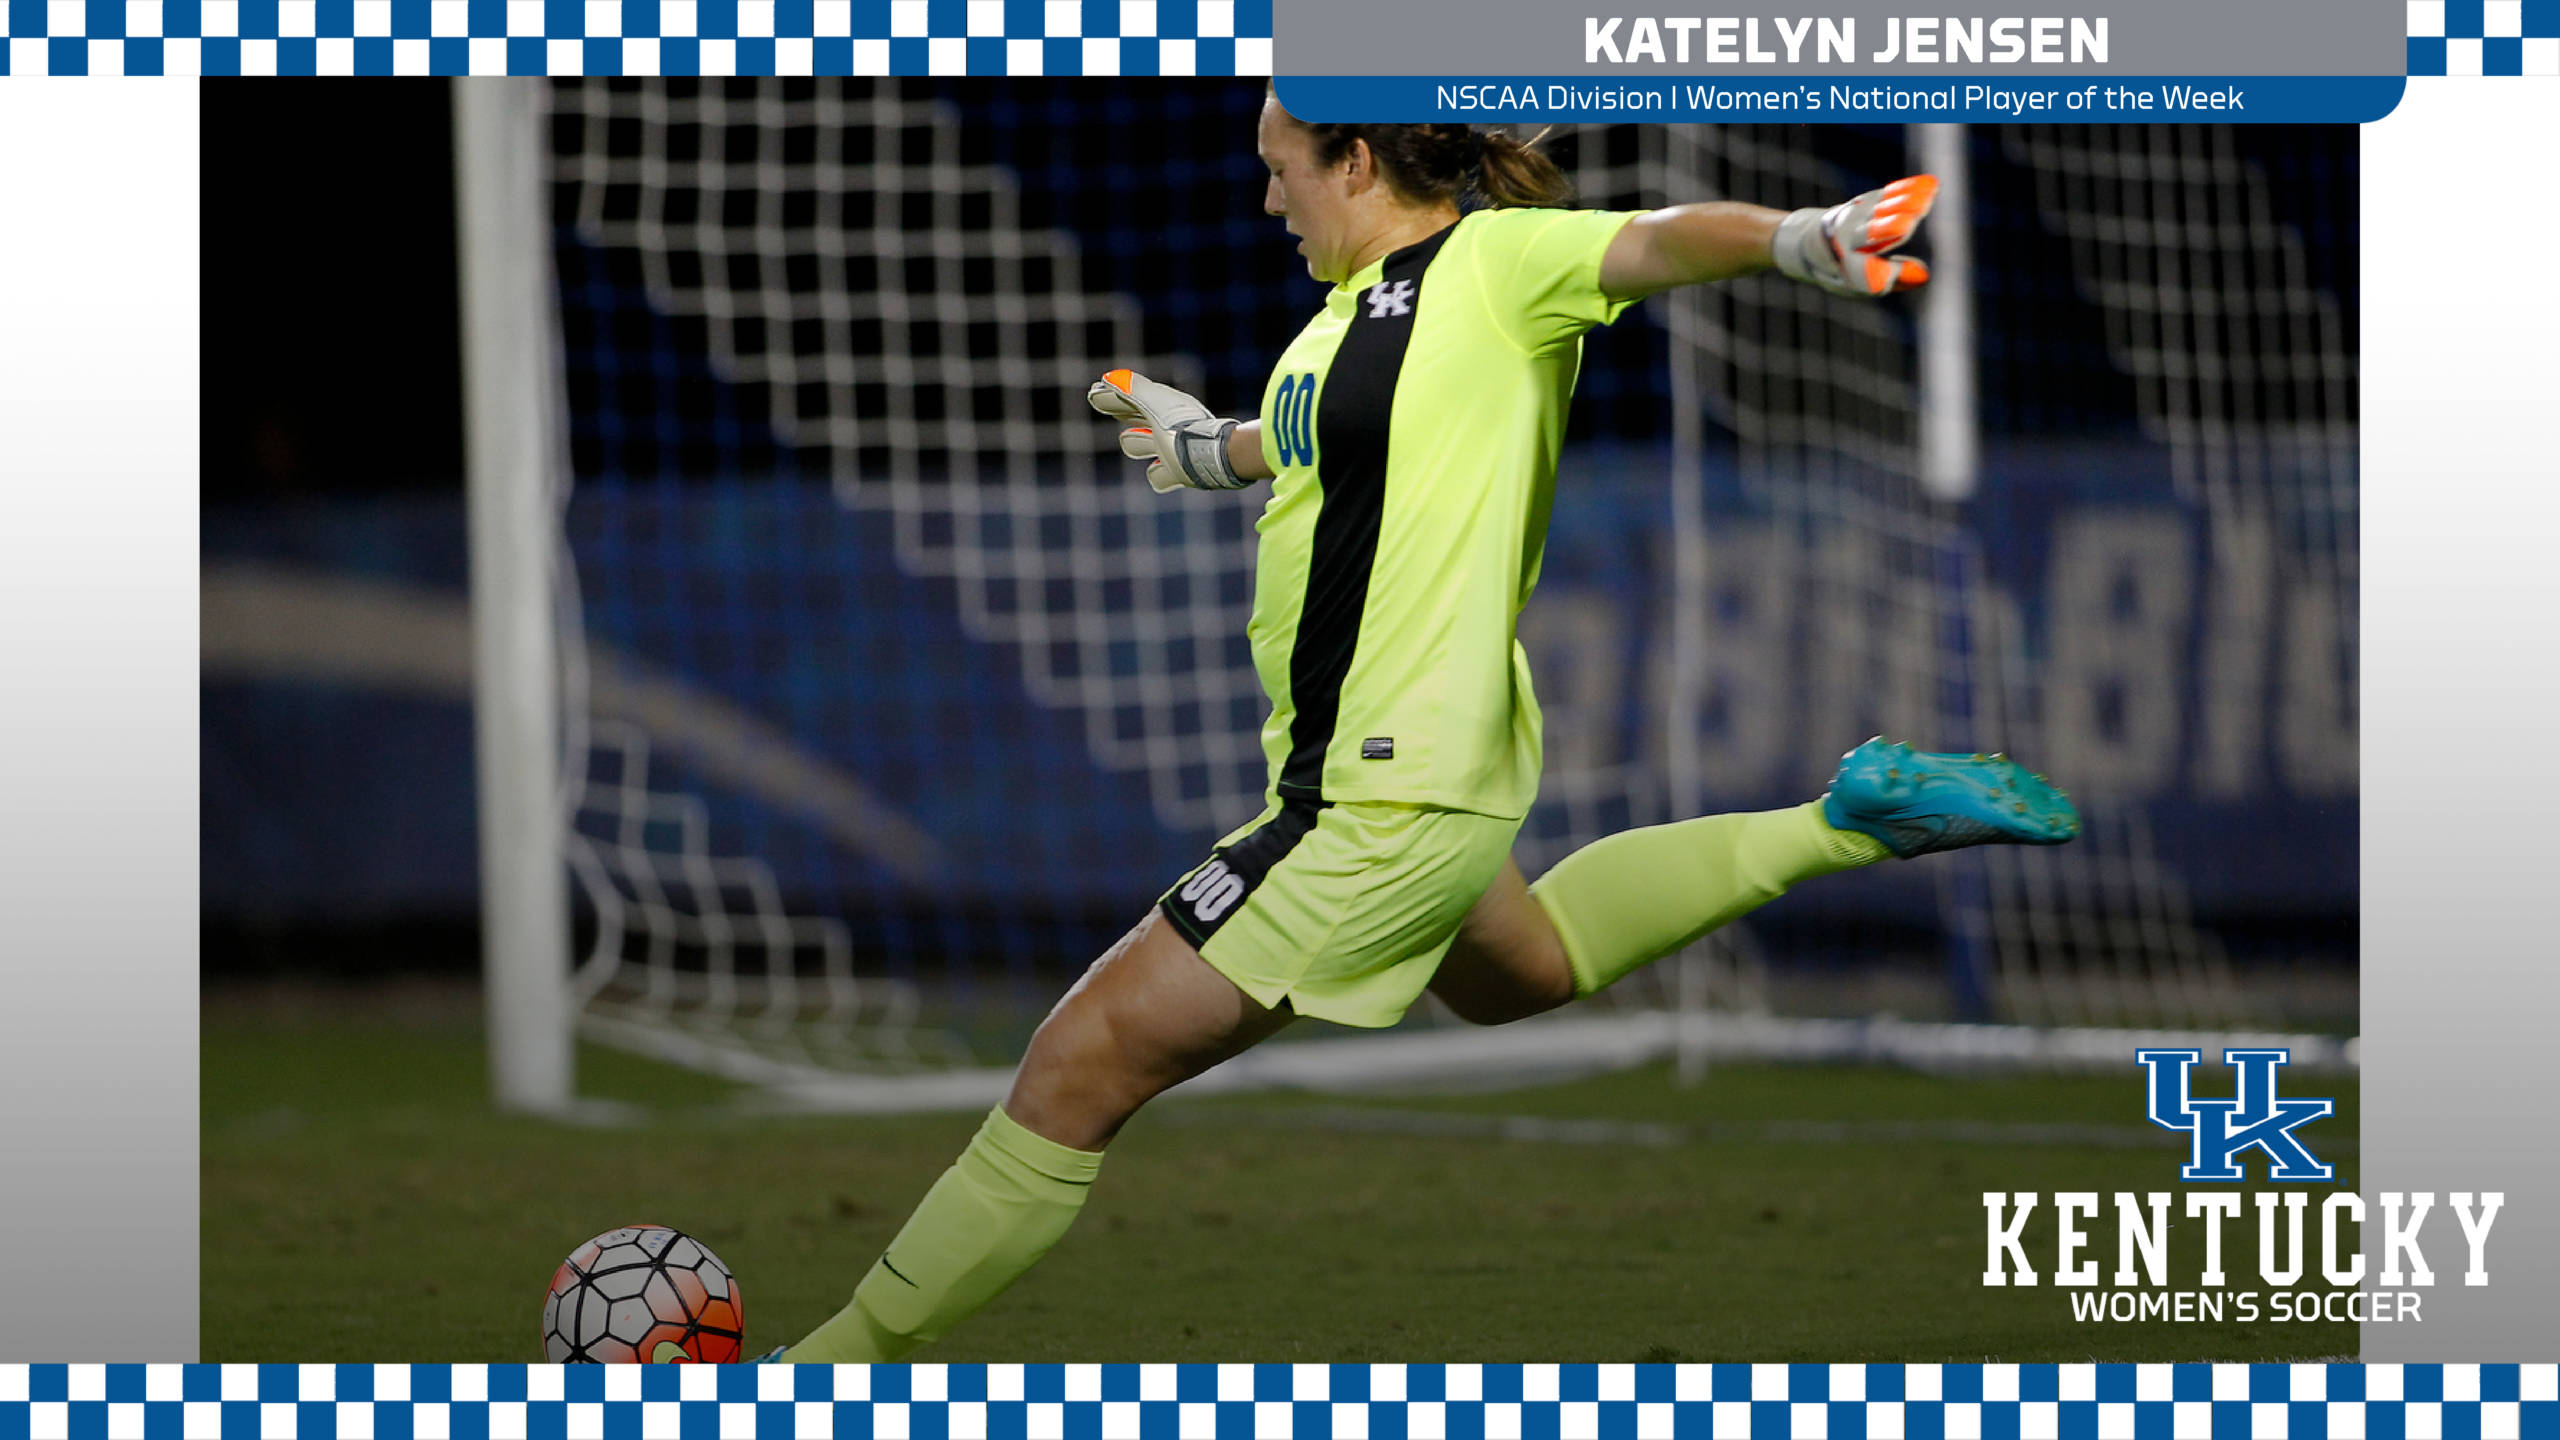 Jensen Named NSCAA Division I National Player of the Week